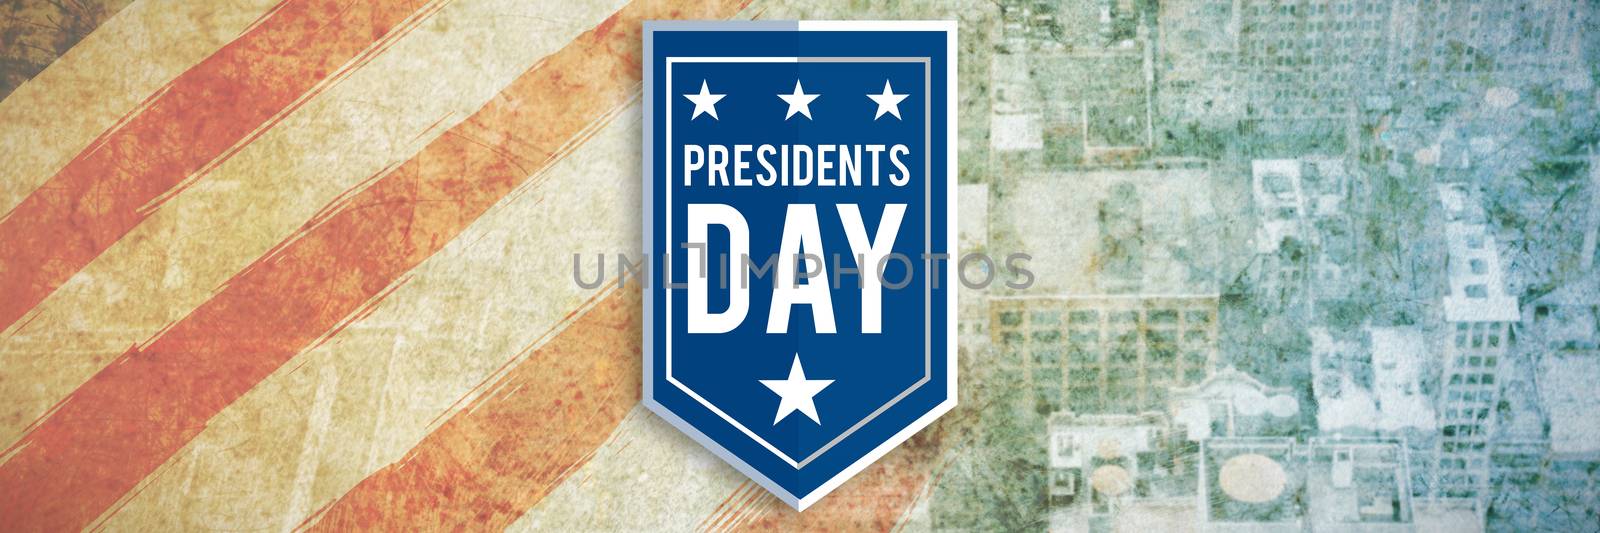 presidents day icon against new york